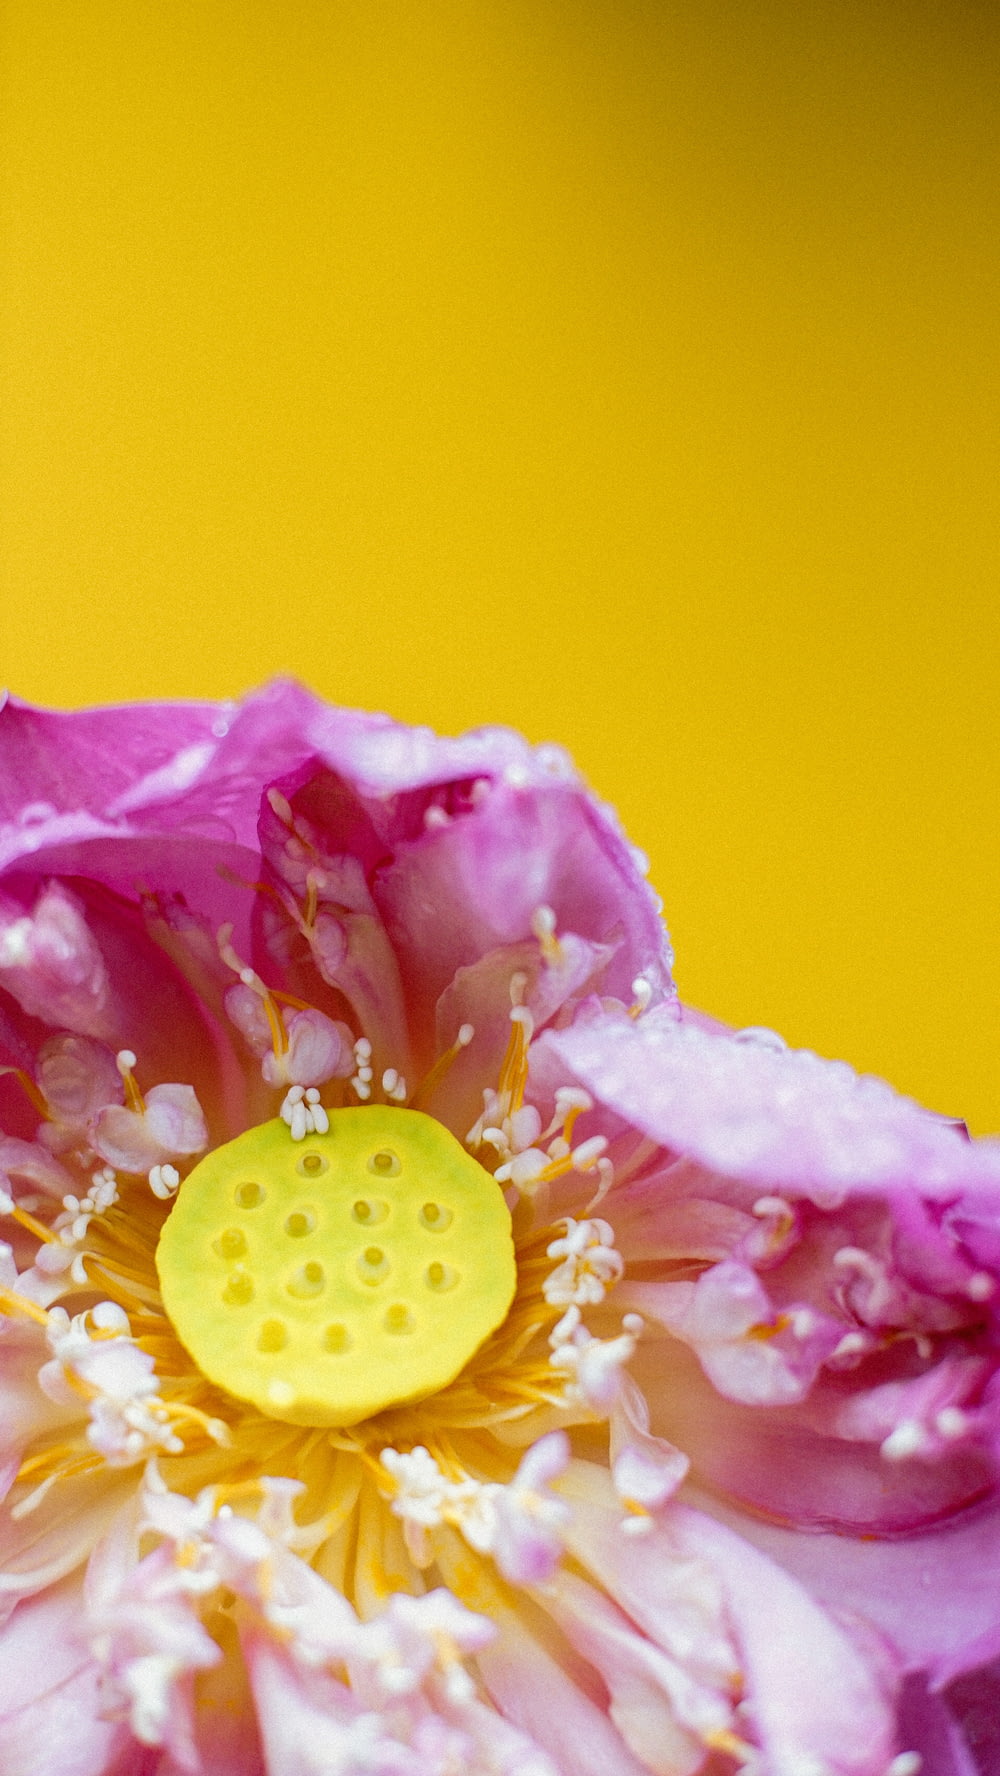 a close up of a pink flower on a yellow background